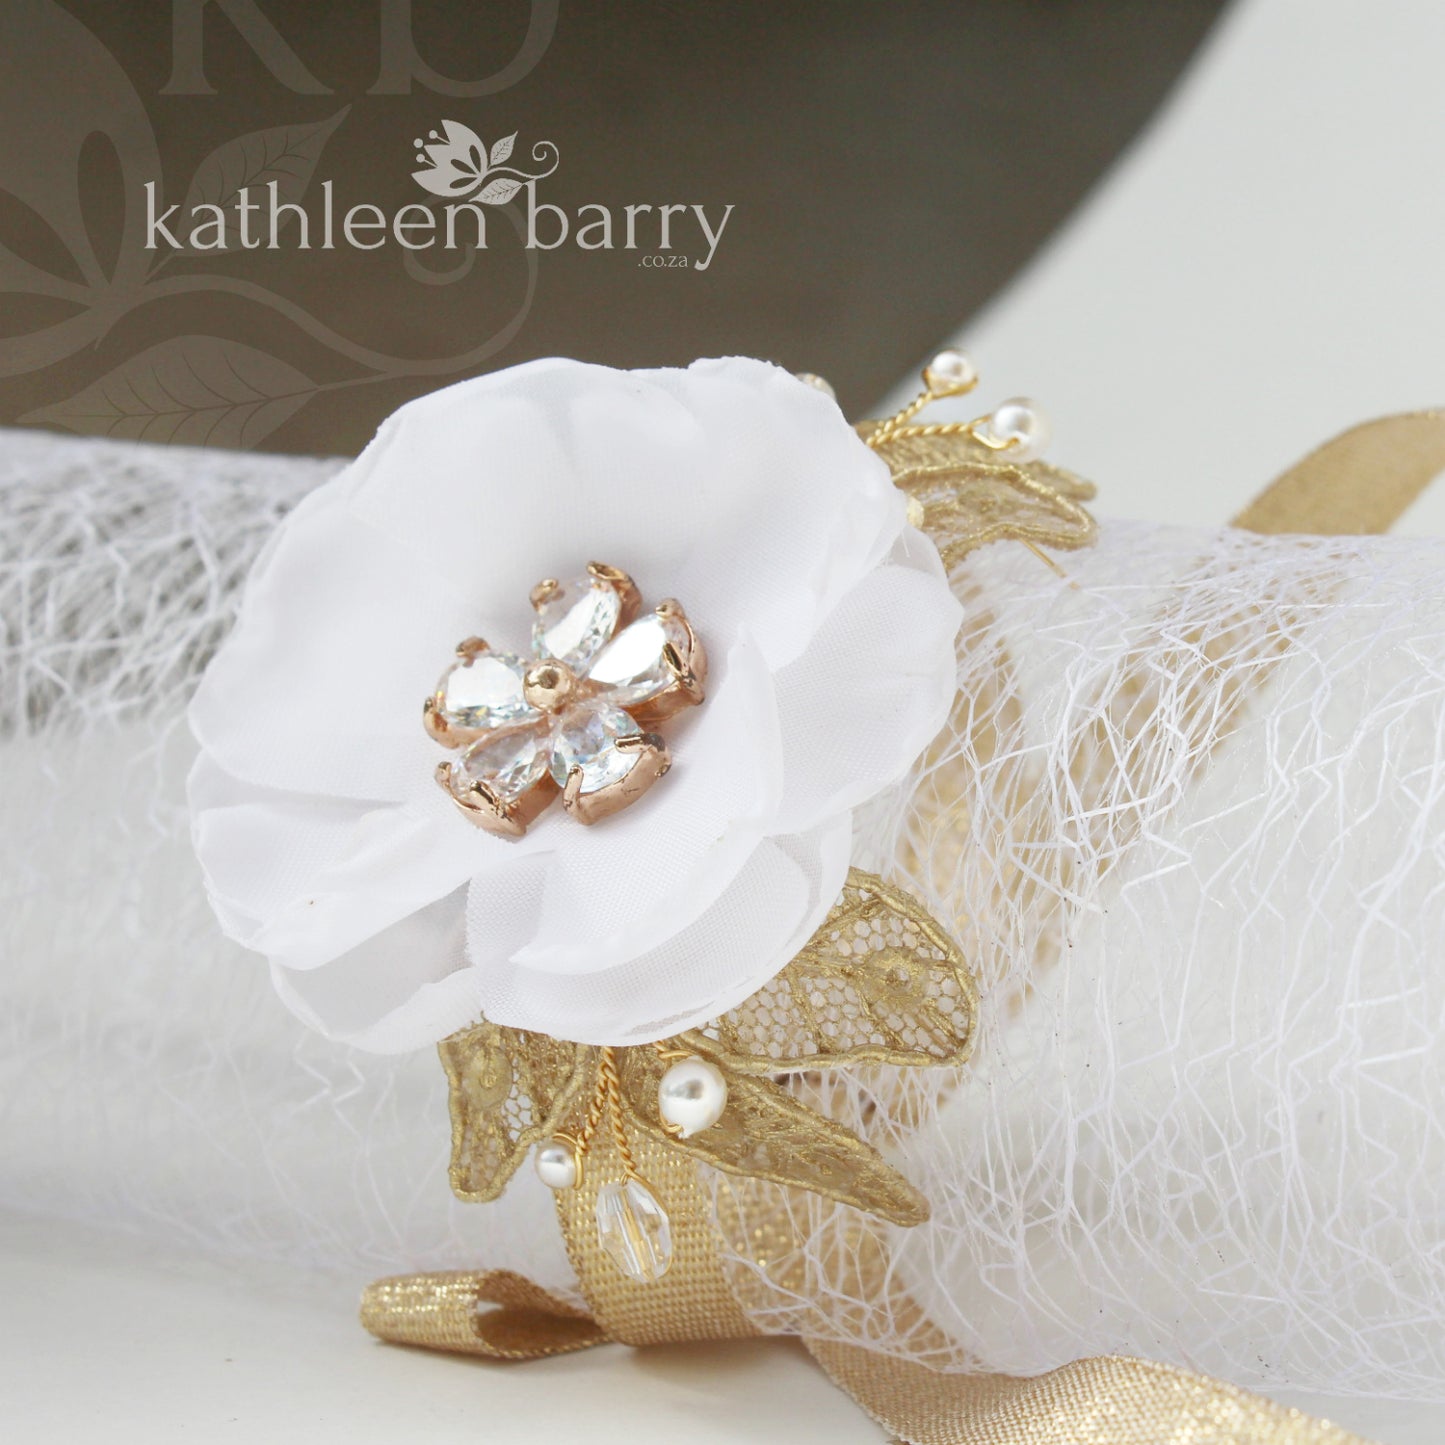 Wrist corsage matric dance prom mother of the bride